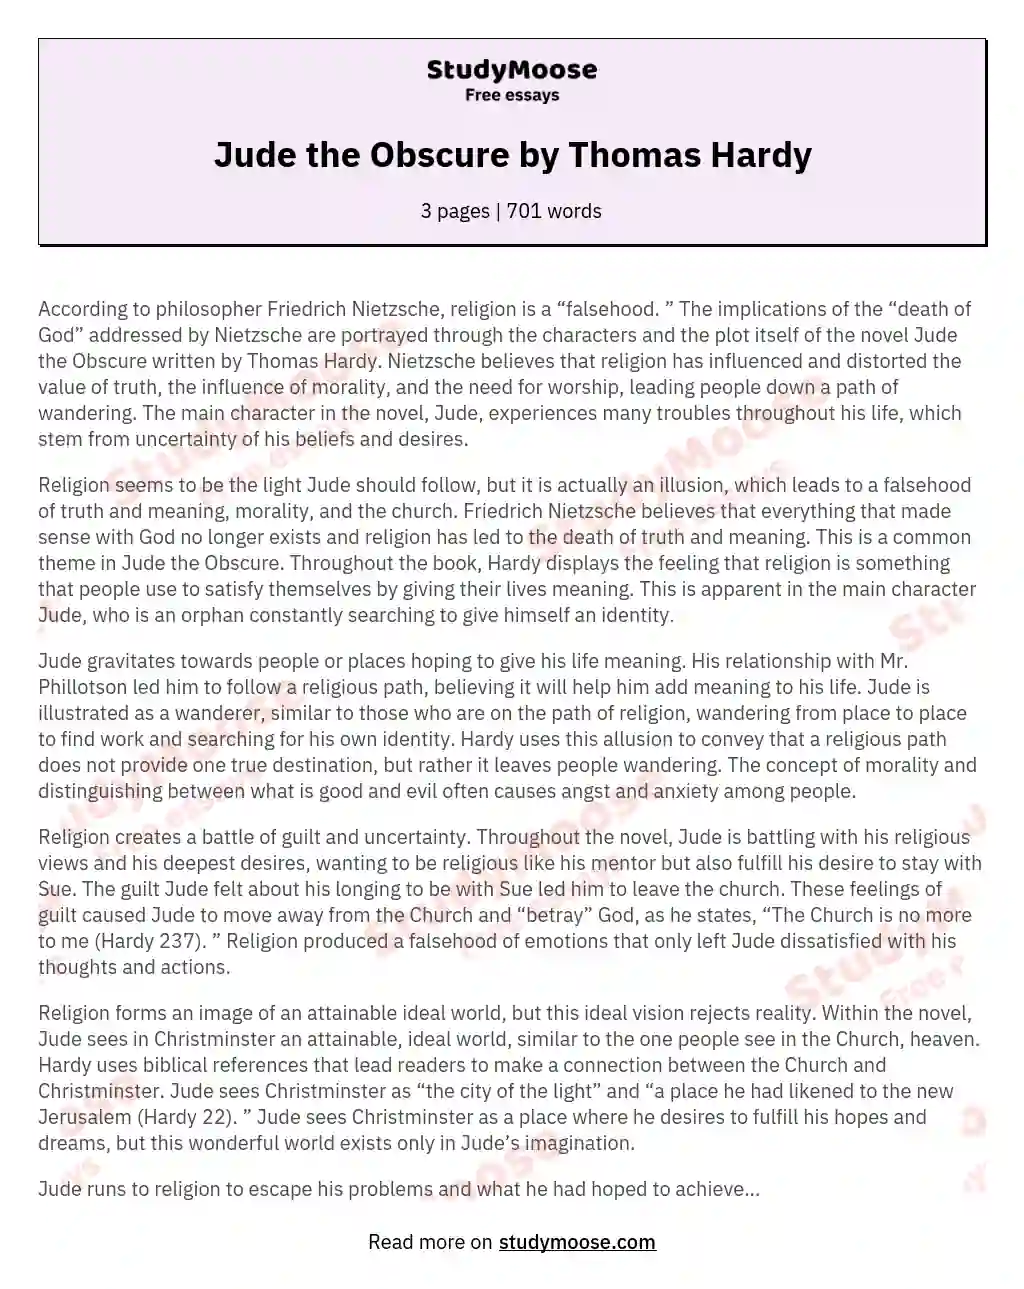 Jude the Obscure by Thomas Hardy essay